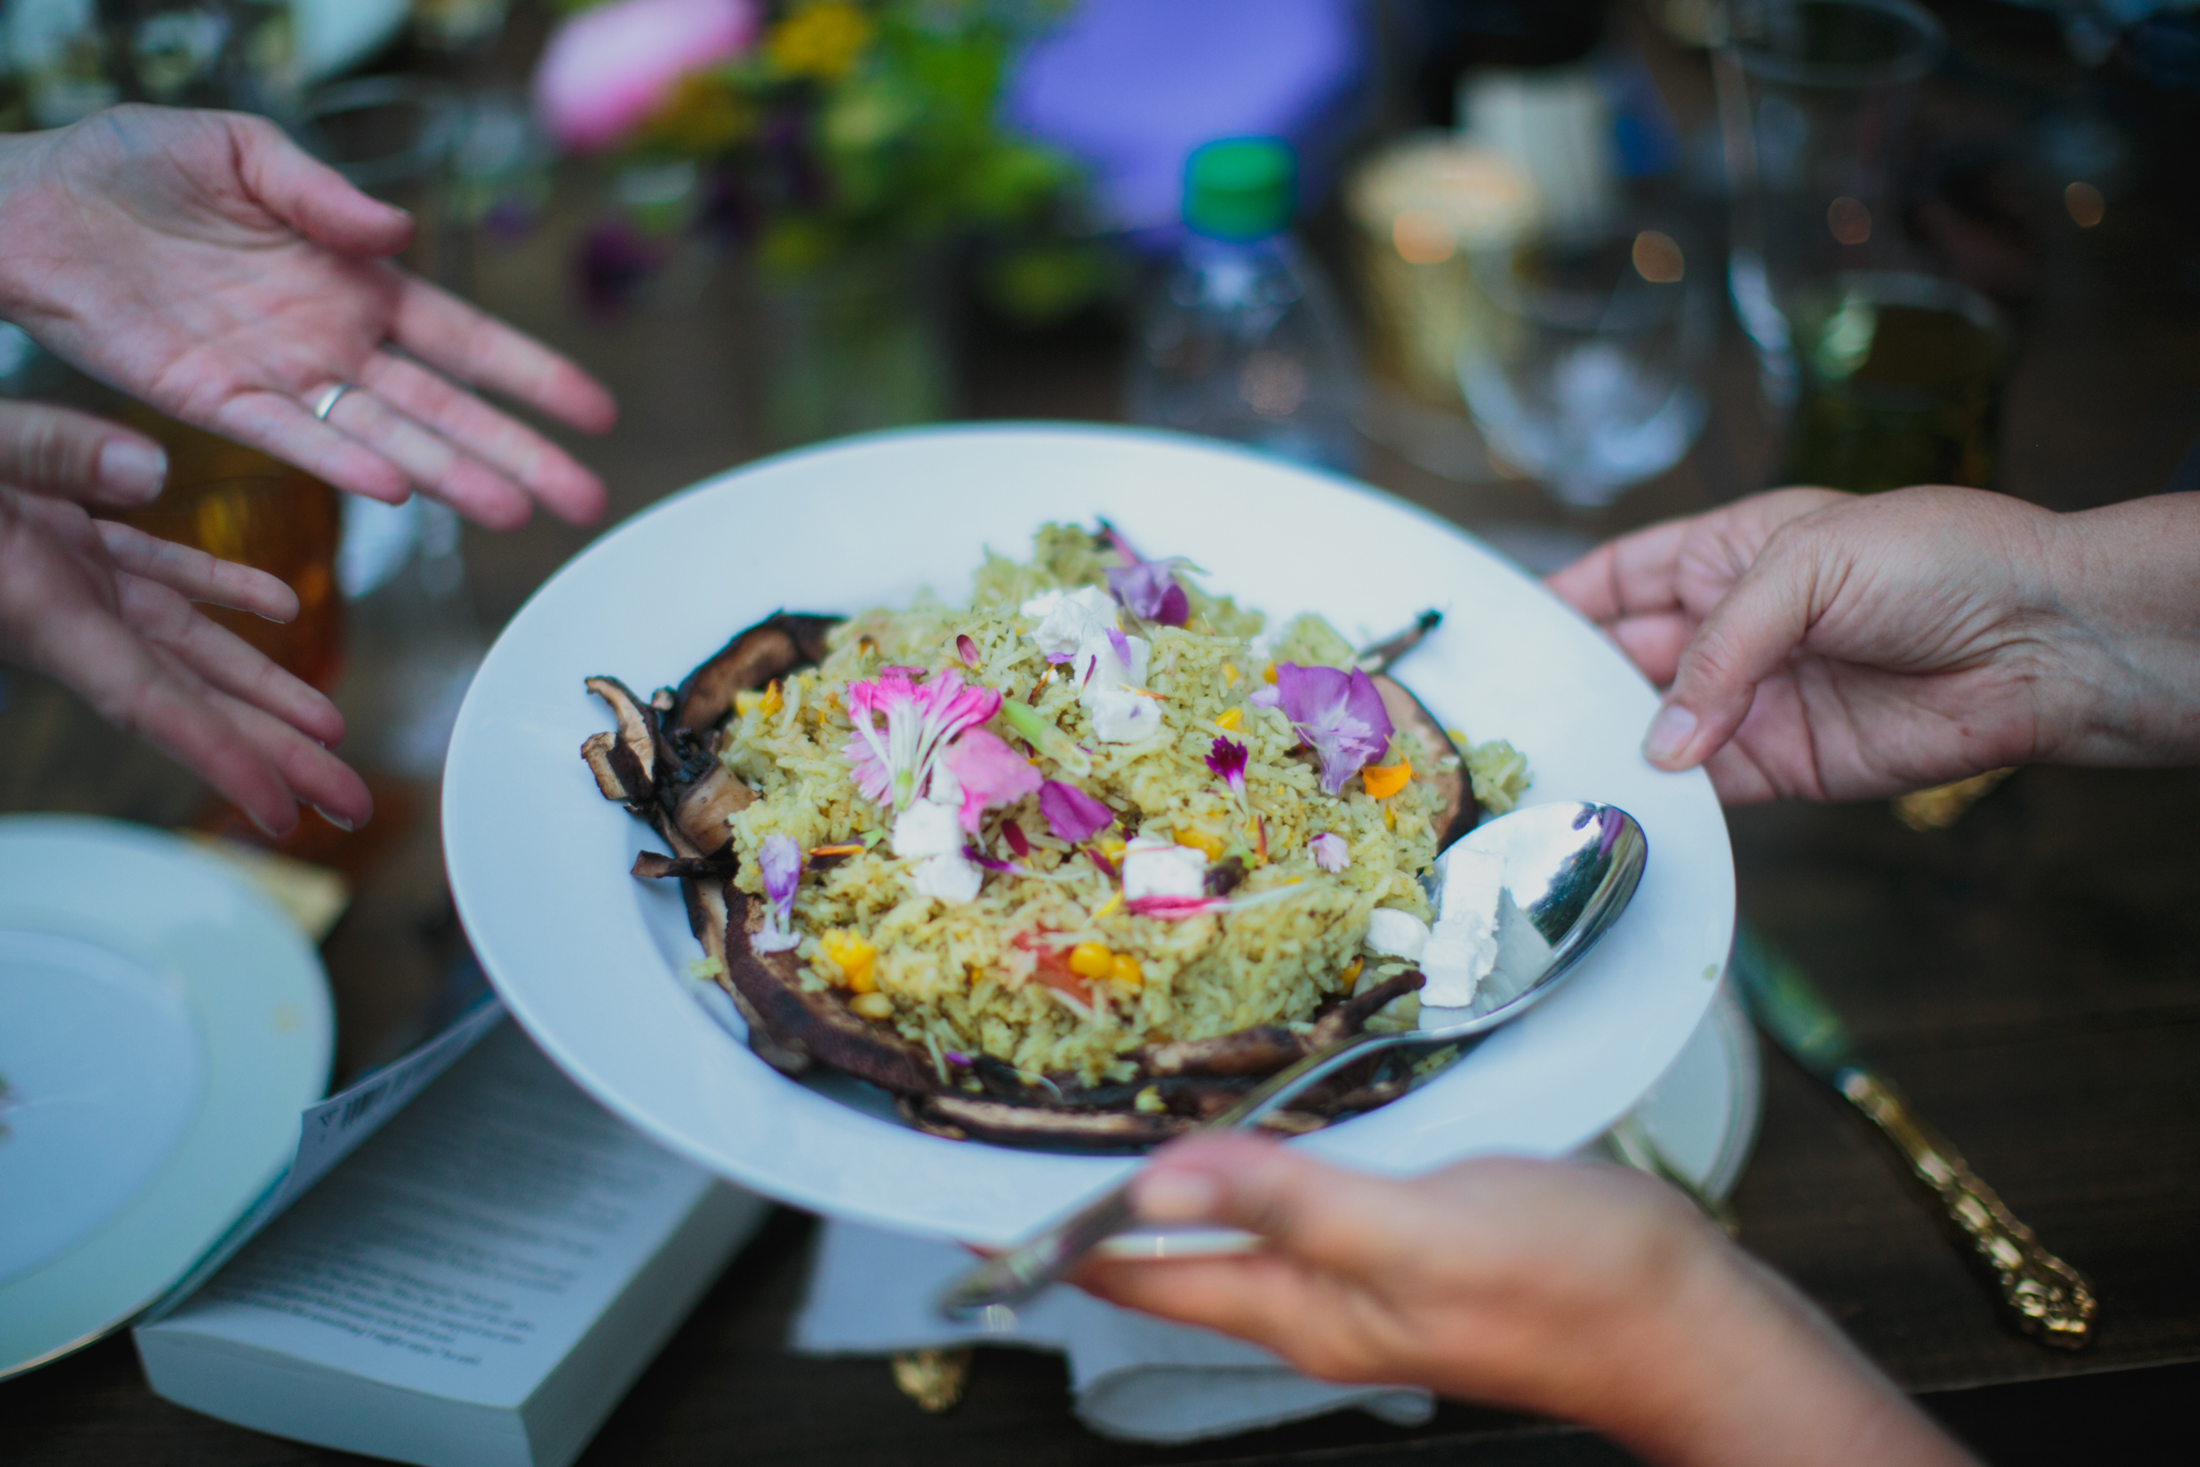 A plate of risotto and flower garnishes is being passed around at the family-style dinner.